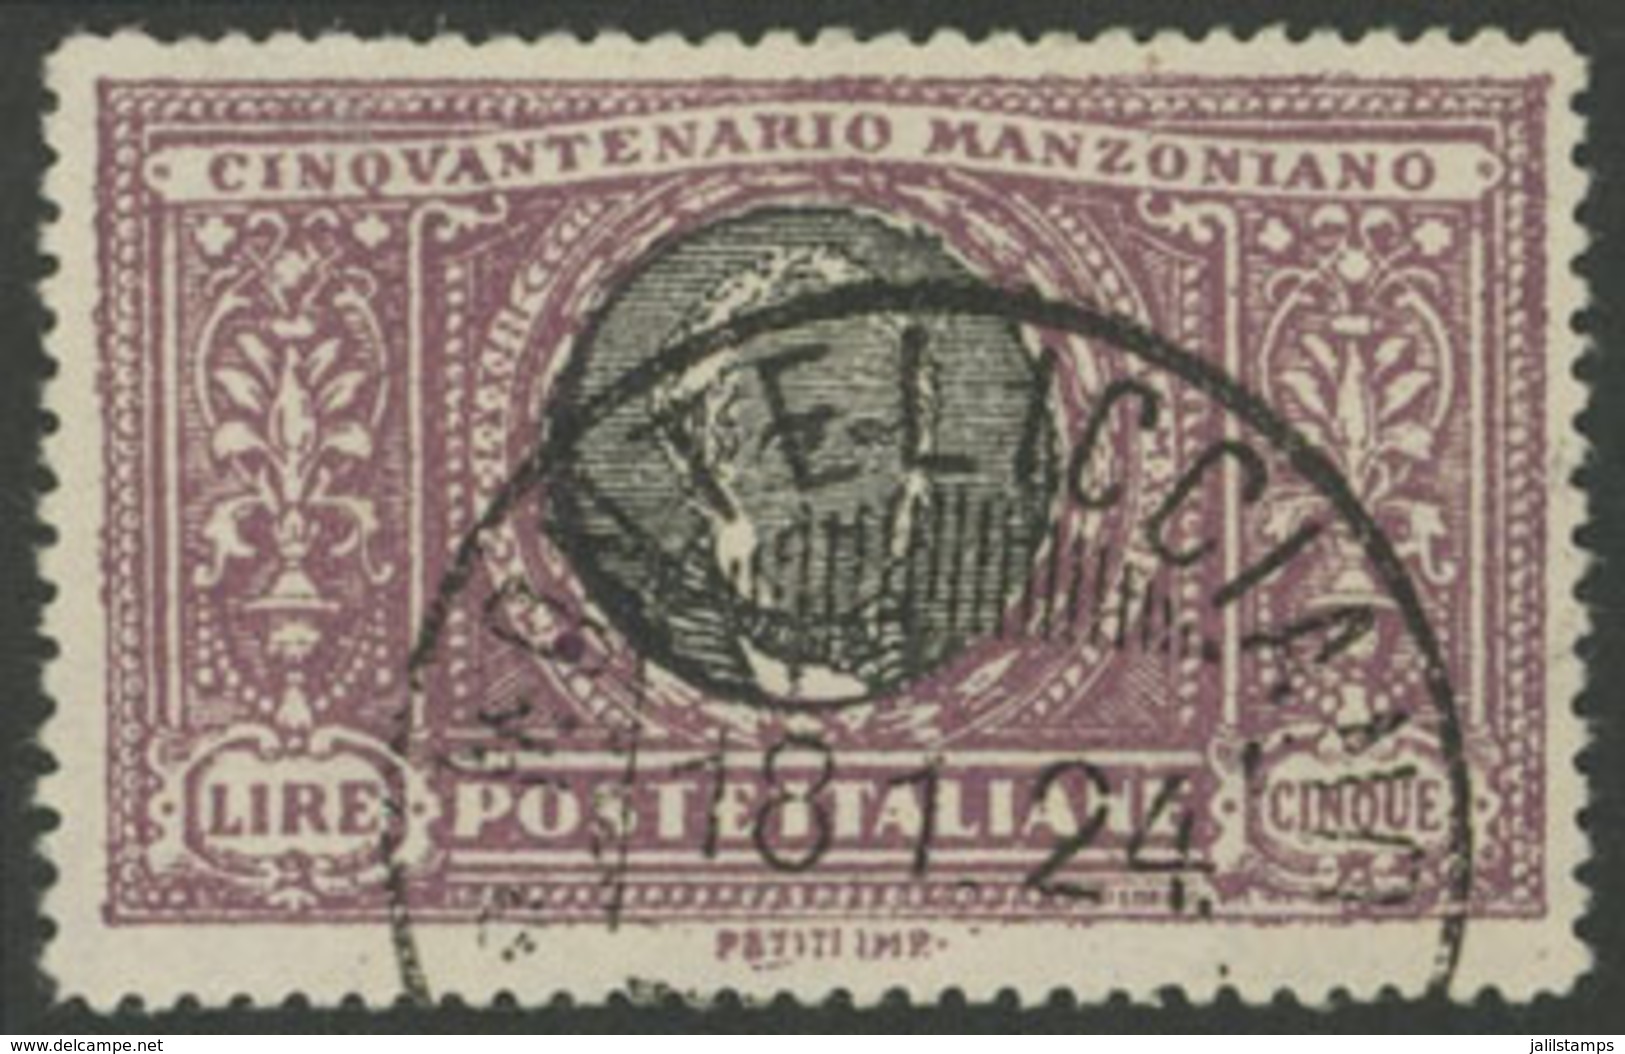 952 ITALY: Sc.170, 1923 5L. Manzoni, High Value Of The Set Used, Excellent Quality! - Unclassified